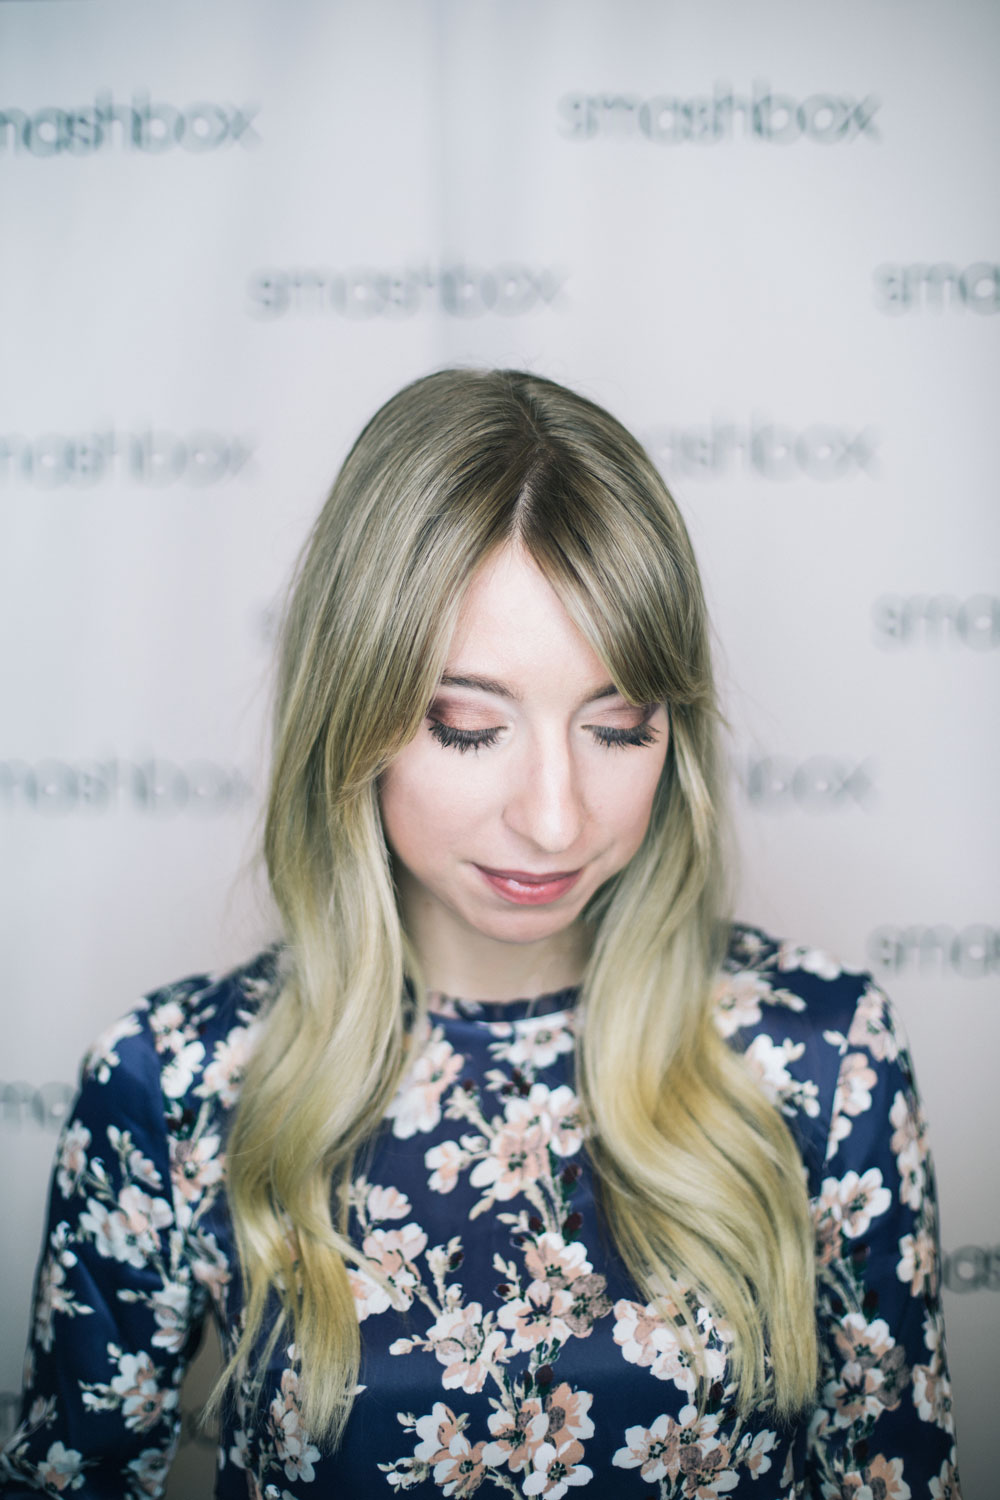 the blondielocks fashion and lifestyle blogger from toronto wearing a club monaco blouse with floral print and bell sleeves. Smashbox cover shot eye palettes review. smashbox cover shot eye shadow palette in golden hour. blonde wavy hair inspiration